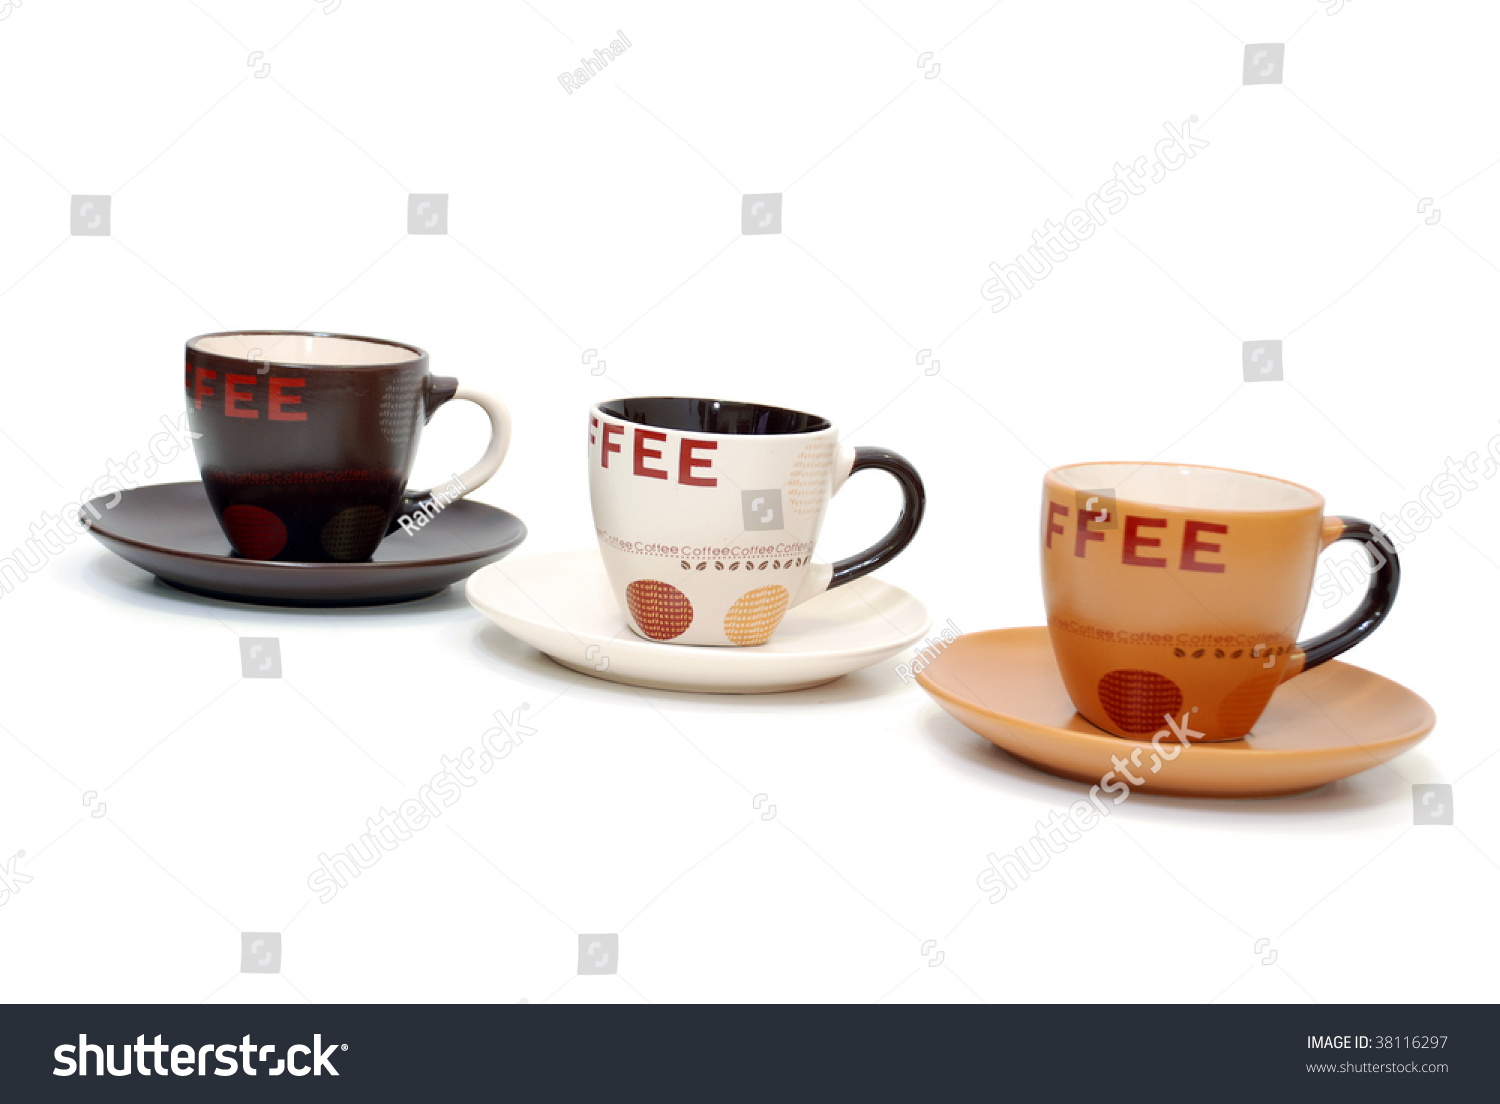 Coffee Cups isolated on white background #38116297